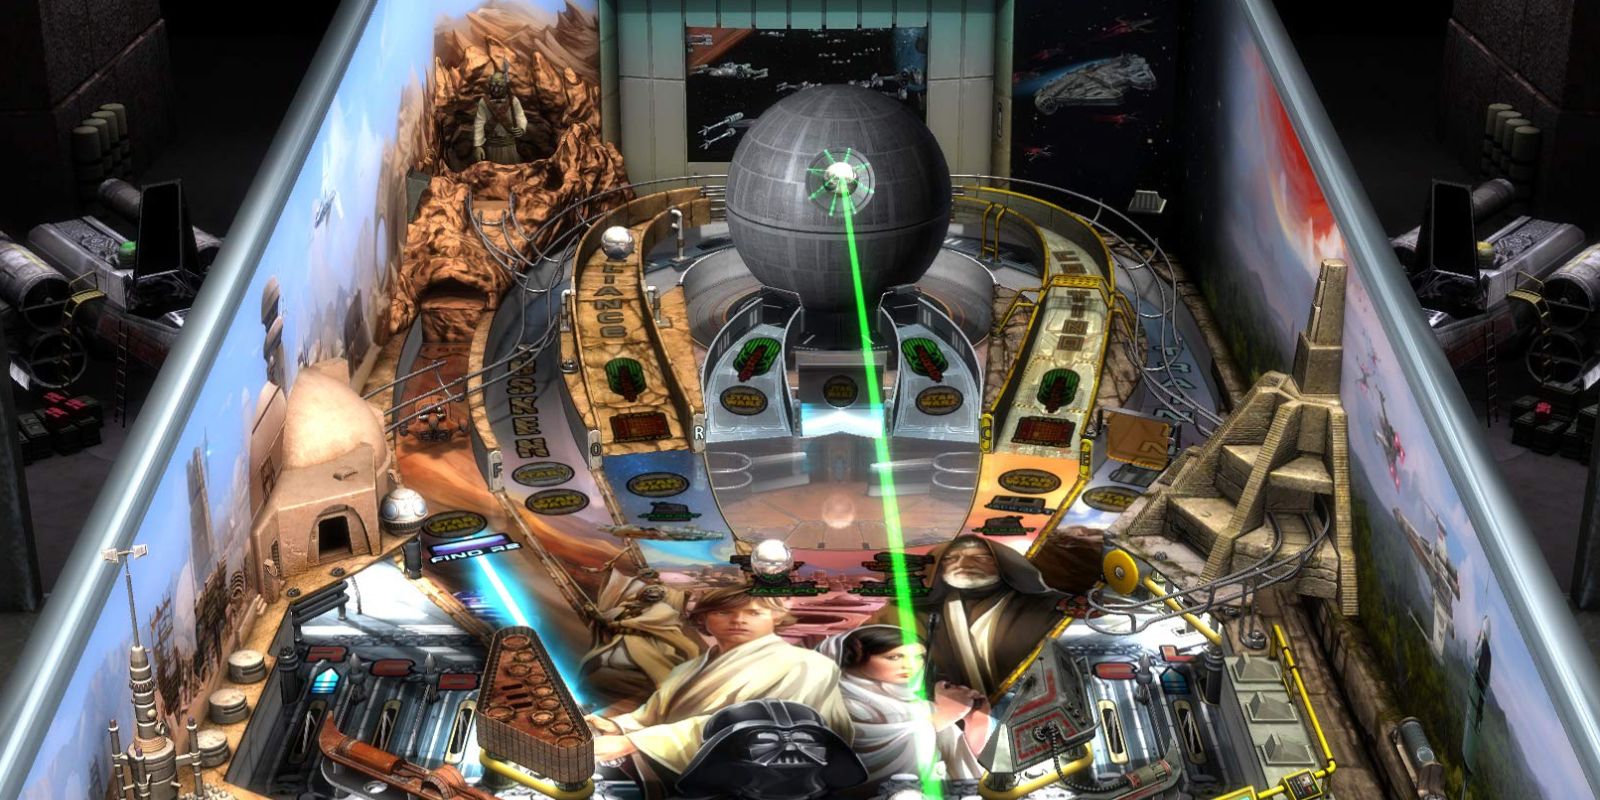 A virtual Star Wars pinball machine, with a Death Star in the center surrounded by other original trilogy locations and characters.